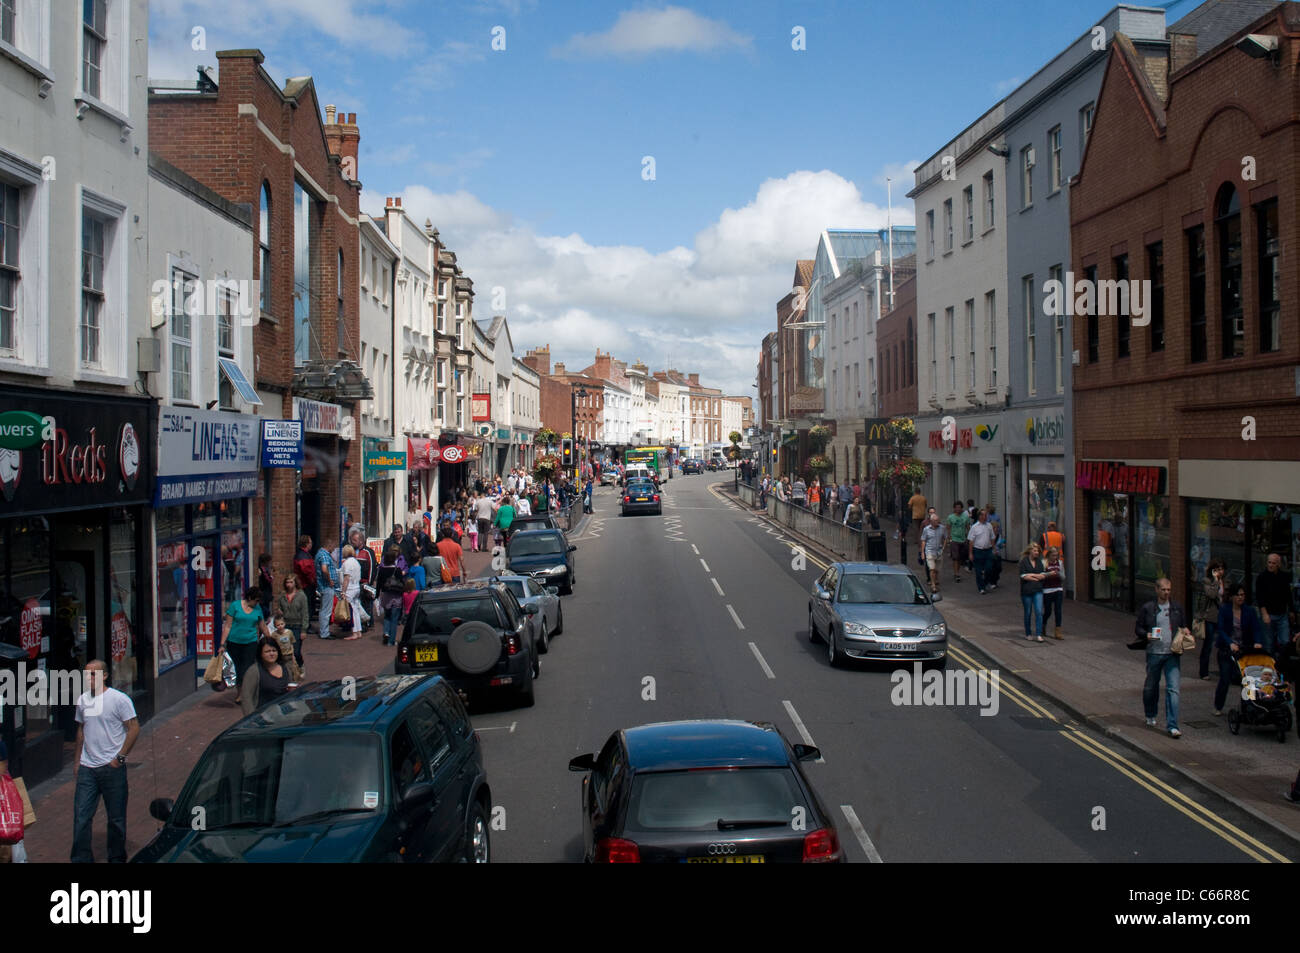 The view from the top of a bus as it travels down East Street, Taunton. The street has many of the popular high street shops. Stock Photo